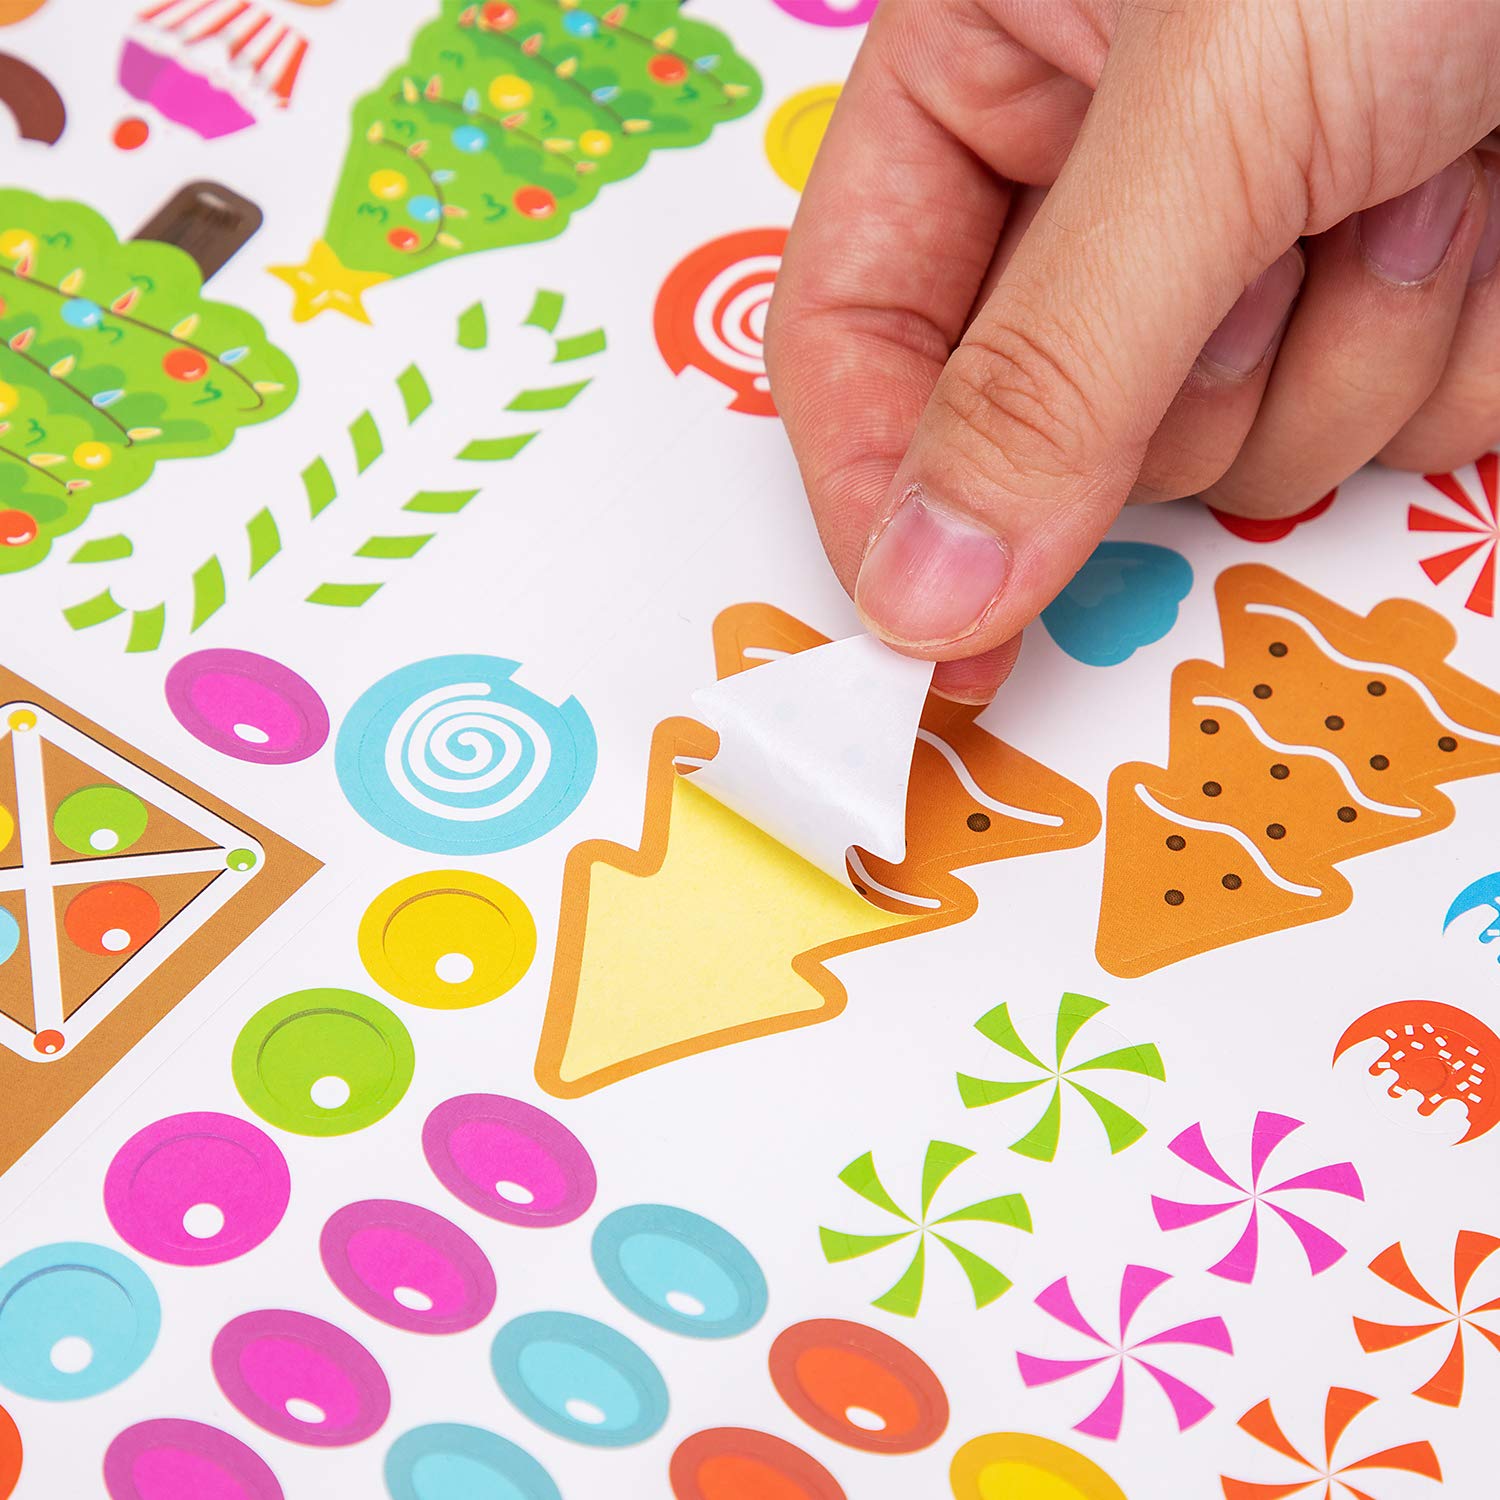 Make-a-Gingerbread House Stickers for Kids - Christmas Party Game/Craft/Activity/Favor/Supplies - 13 Finished Products